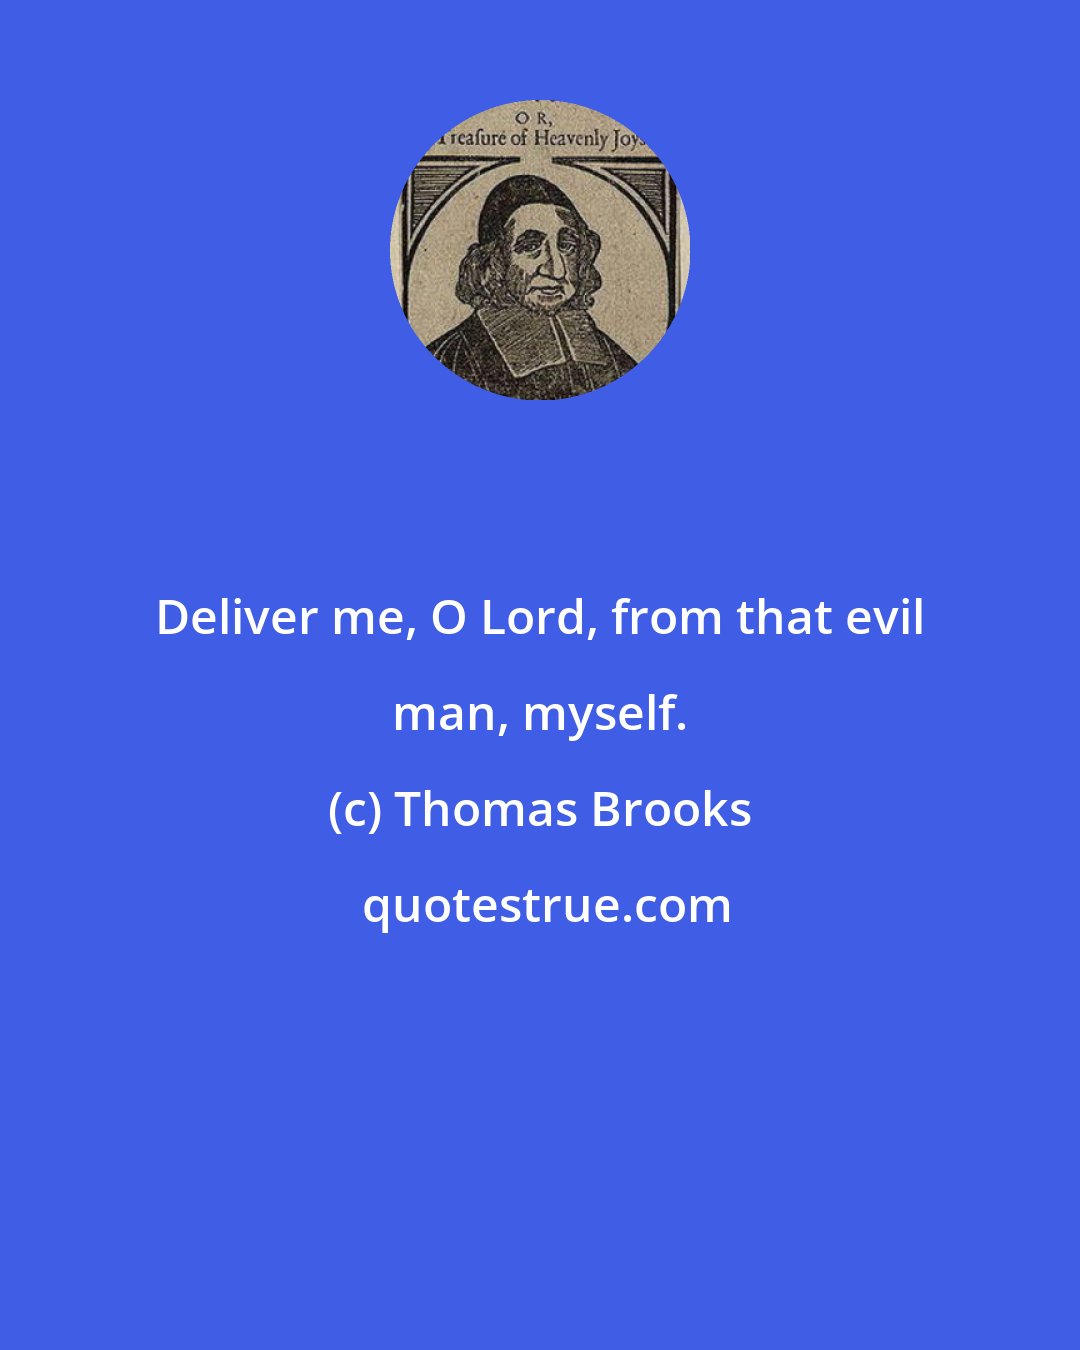 Thomas Brooks: Deliver me, O Lord, from that evil man, myself.